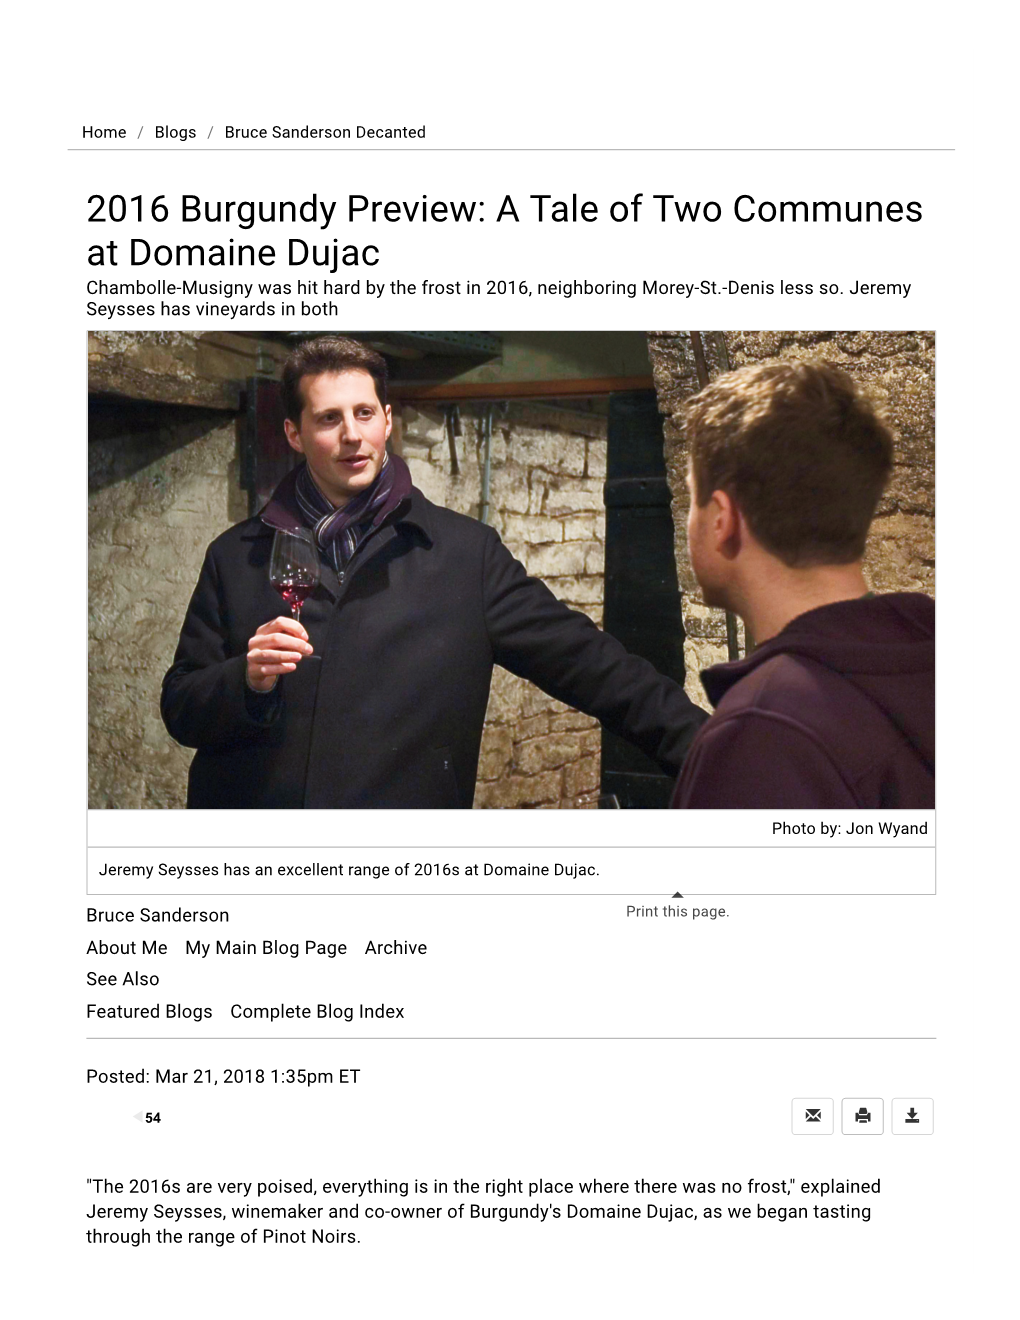 2016 Burgundy Preview: a Tale of Two Communes at Domaine Dujac Chambolle-Musigny Was Hit Hard by the Frost in 2016, Neighboring Morey-St.-Denis Less So